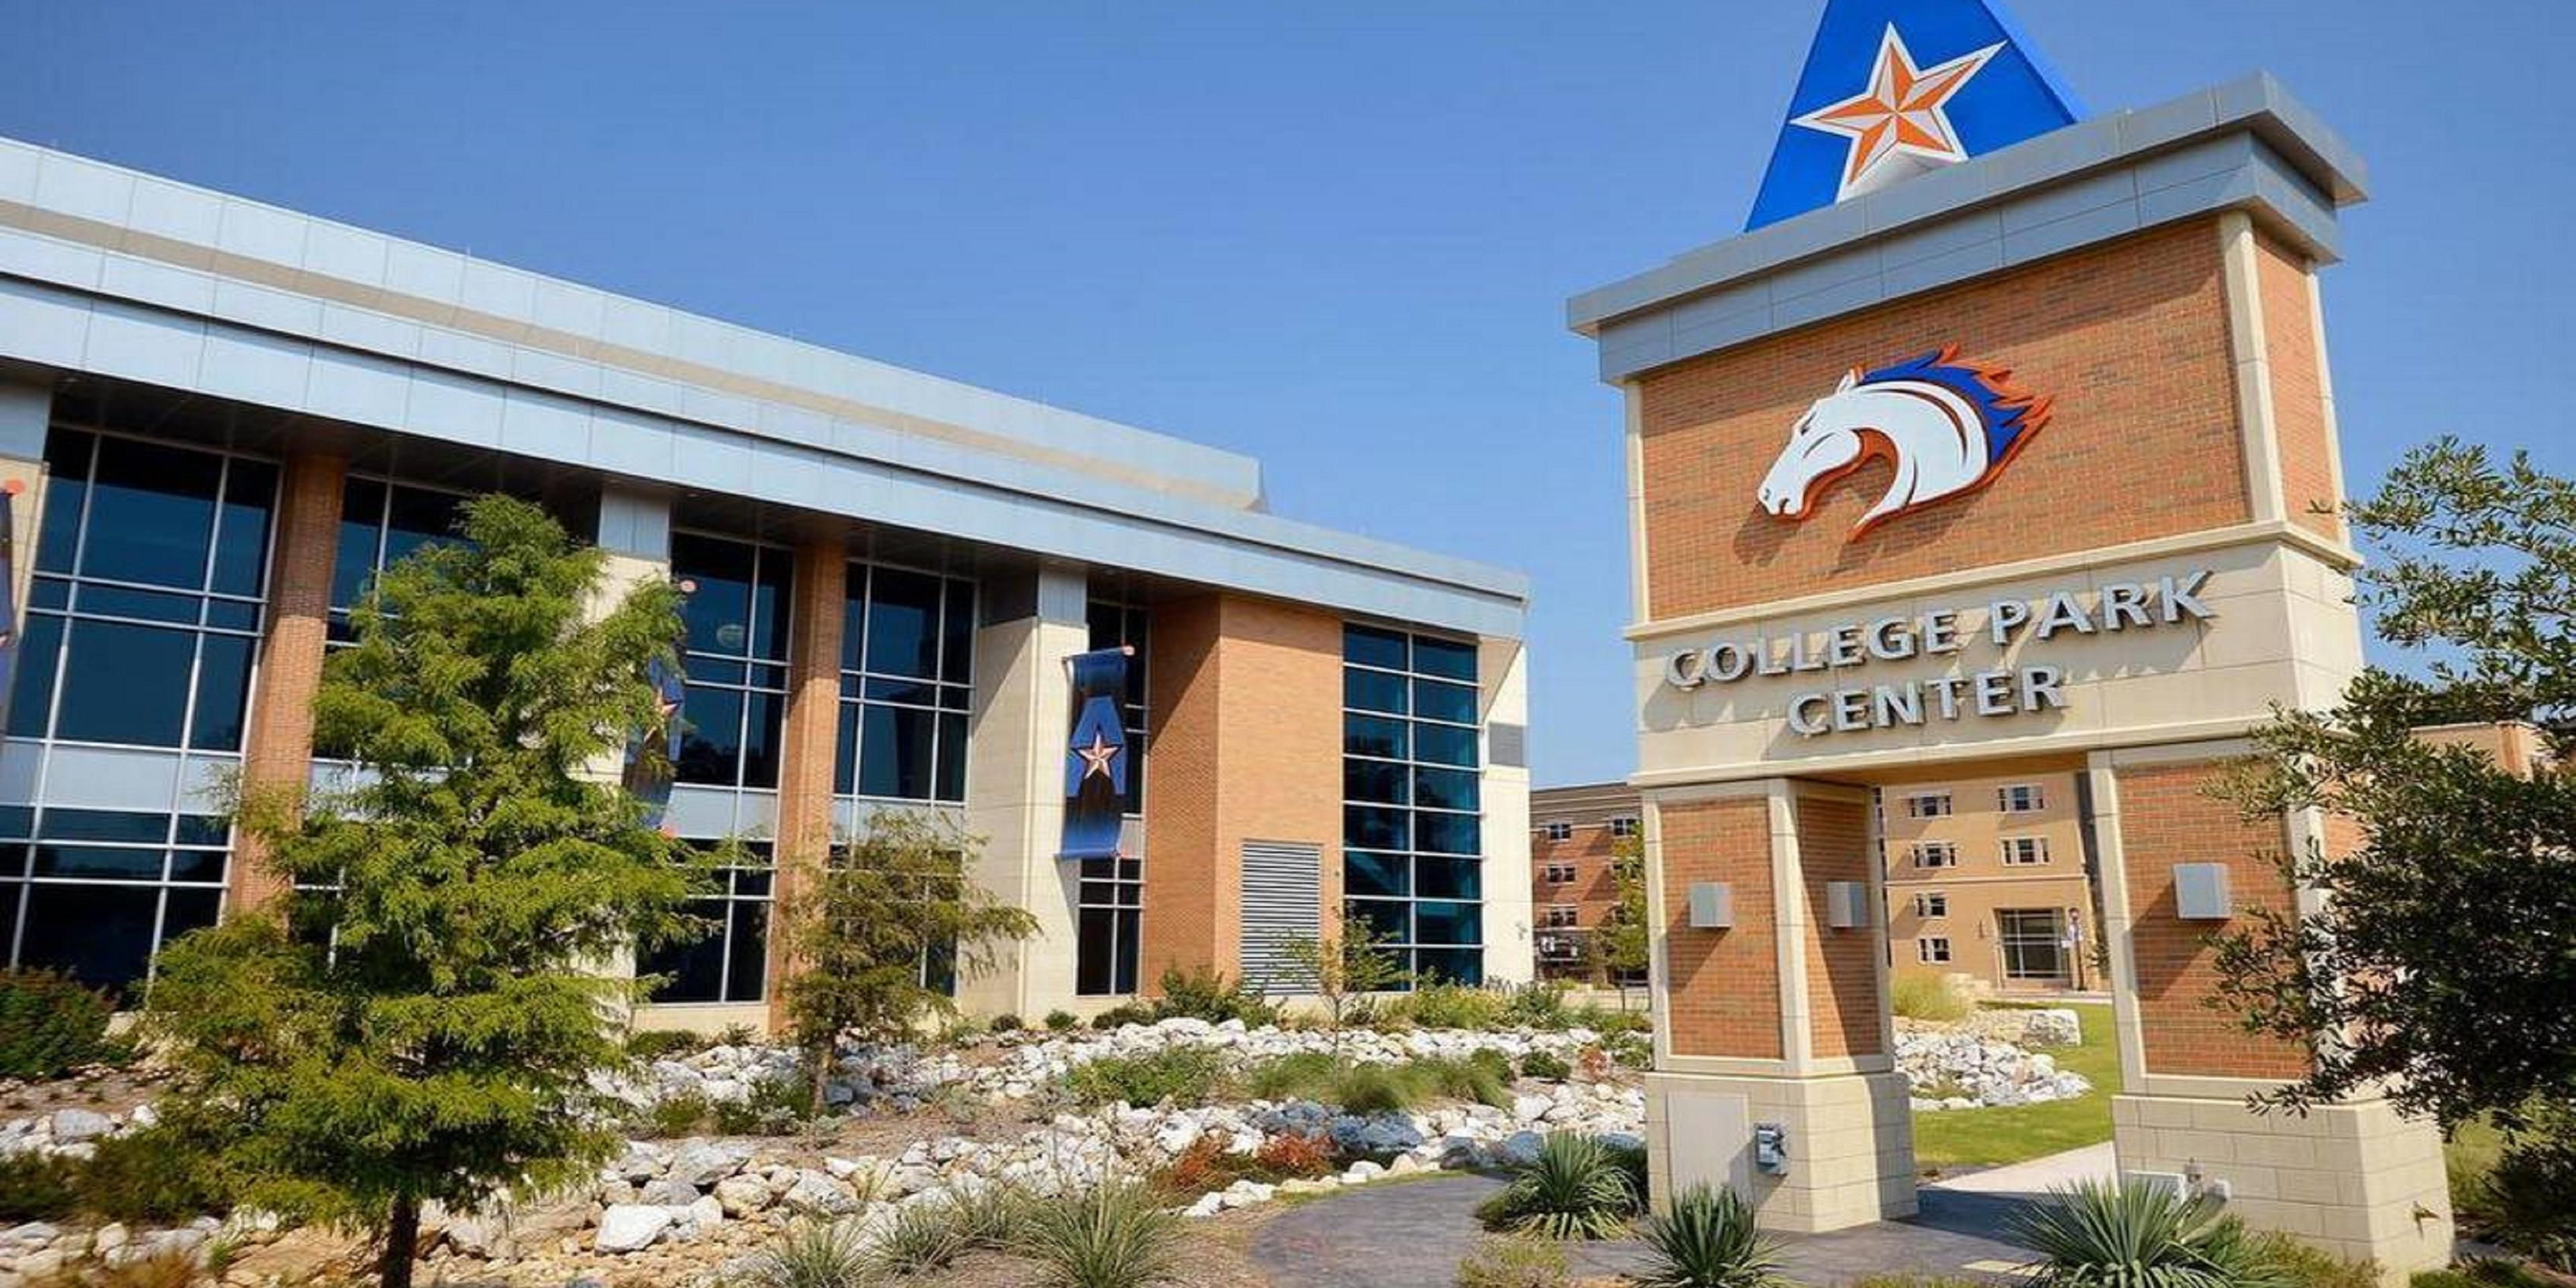 Whether you are coming in to see the UTA Mavericks Sports Teams or attending a Graduation Ceremony, give us a call. Just ask for the UTA rates and book your guest rooms.  UTA was recently named No. 1 College in 2020 in the Nation for our Veterans!